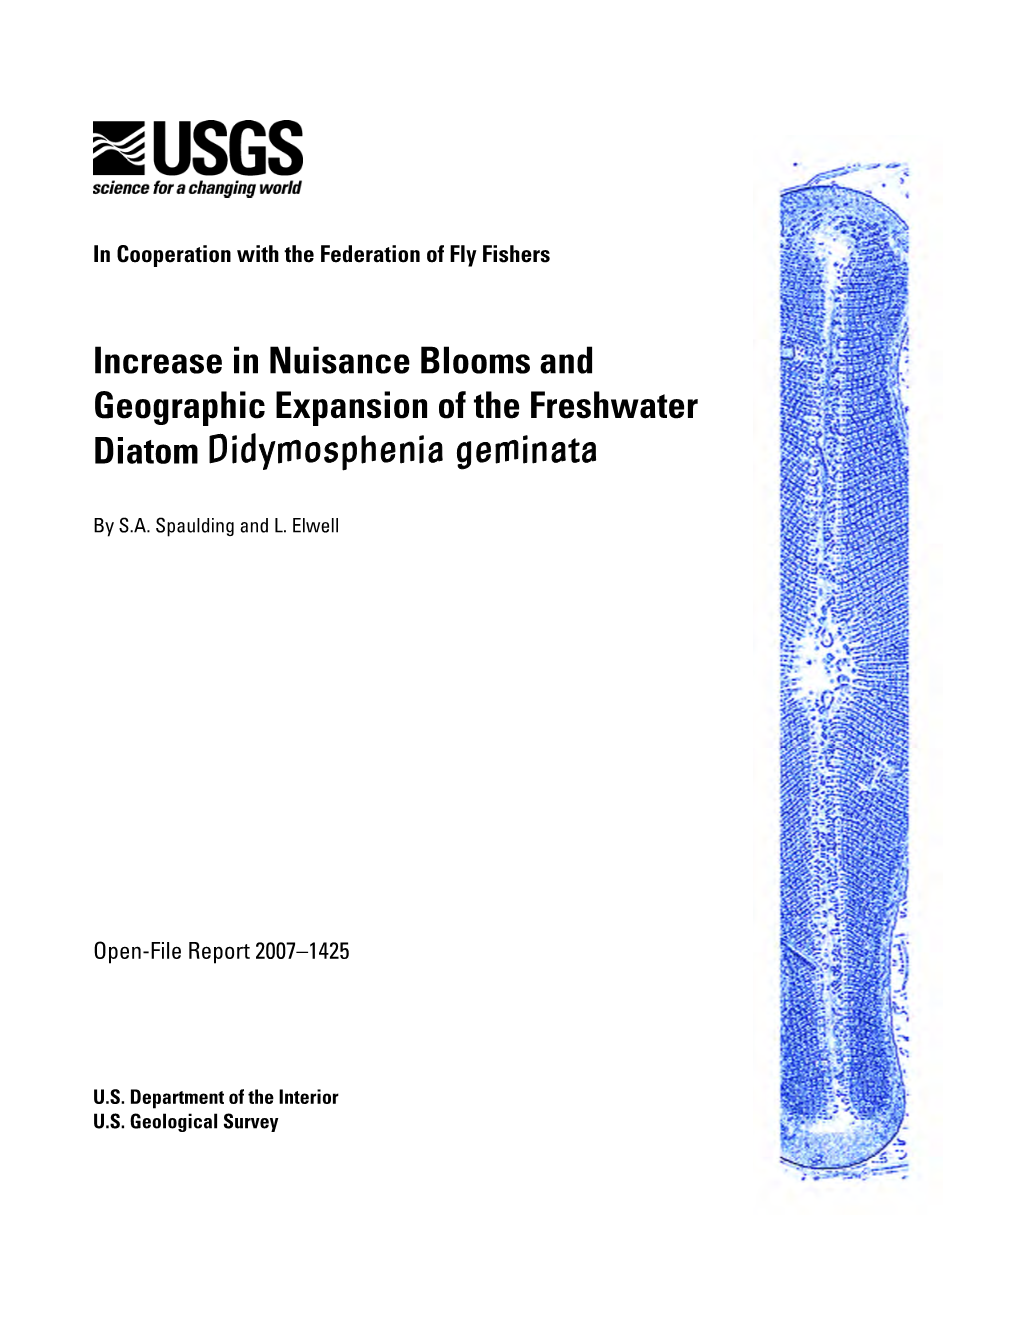 Increase in Nuisance Blooms and Geographic Expansion of the Freshwater Diatom Didymosphenia Geminata